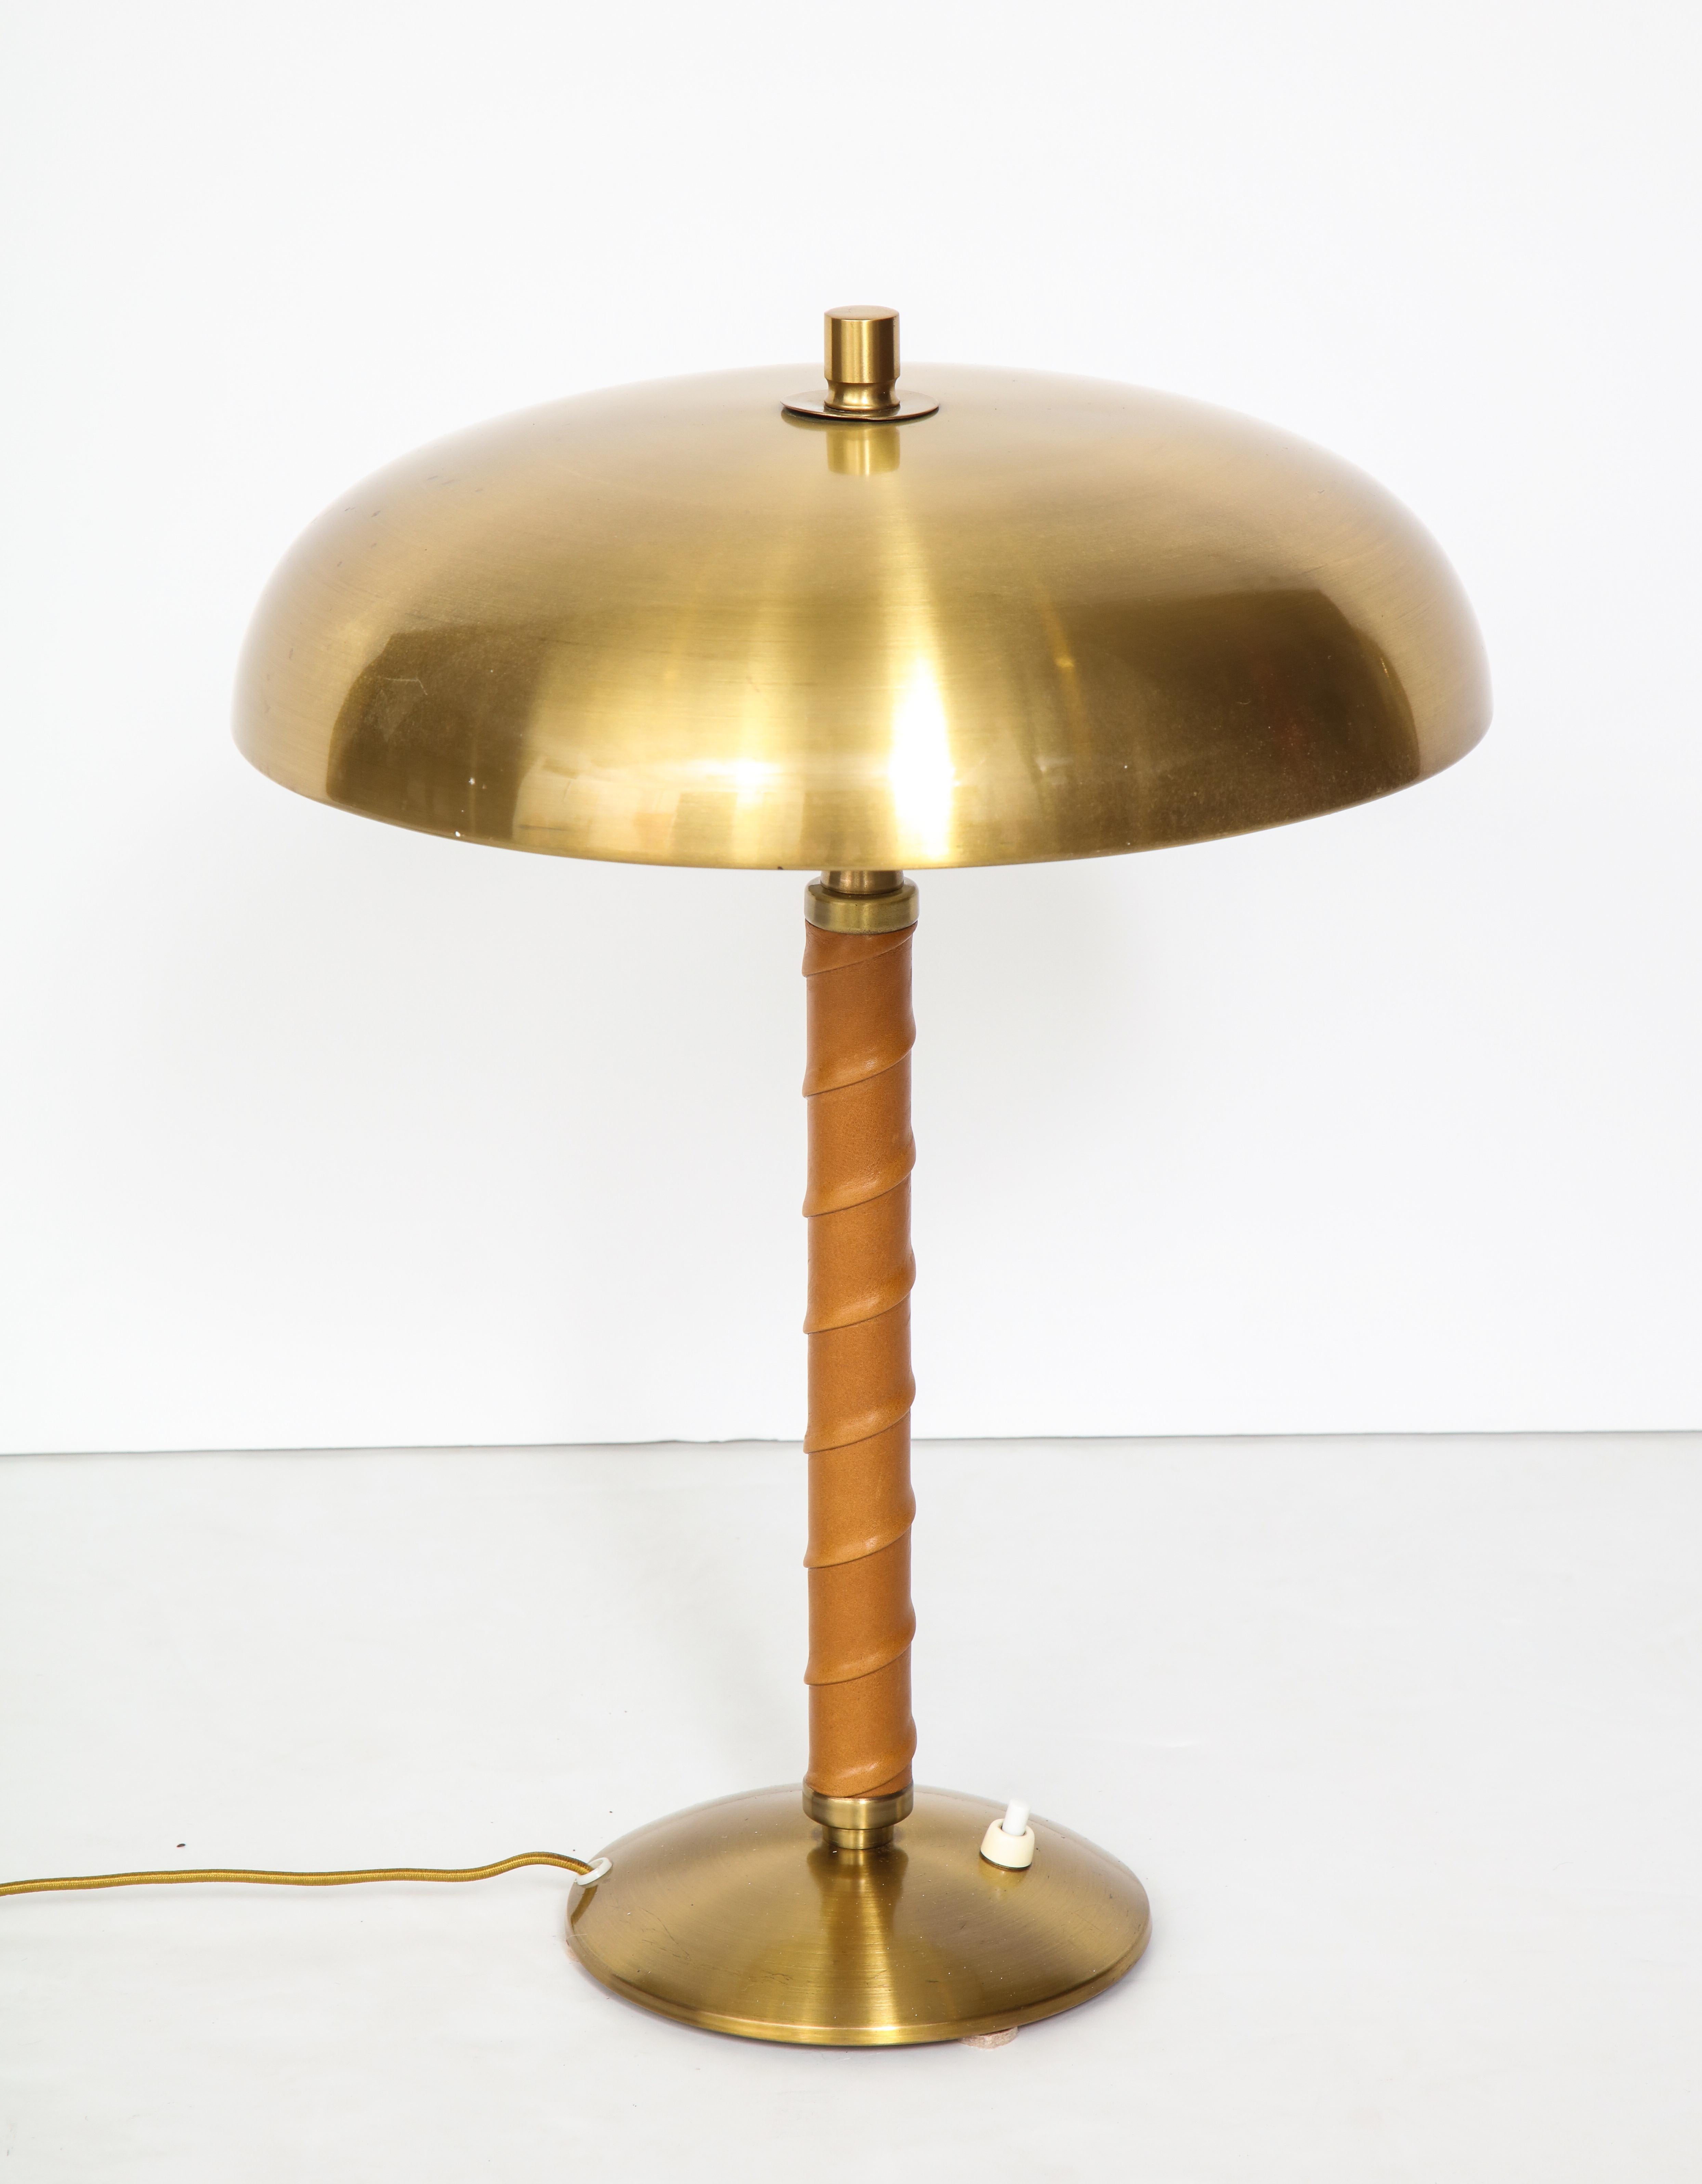 Swedish table lamp by Einar Båckström, Malmö, circa 1940s dome brass top with a leather wrapped stem. Restored and rewired for US (2 x 60w max). Stamped on the base.